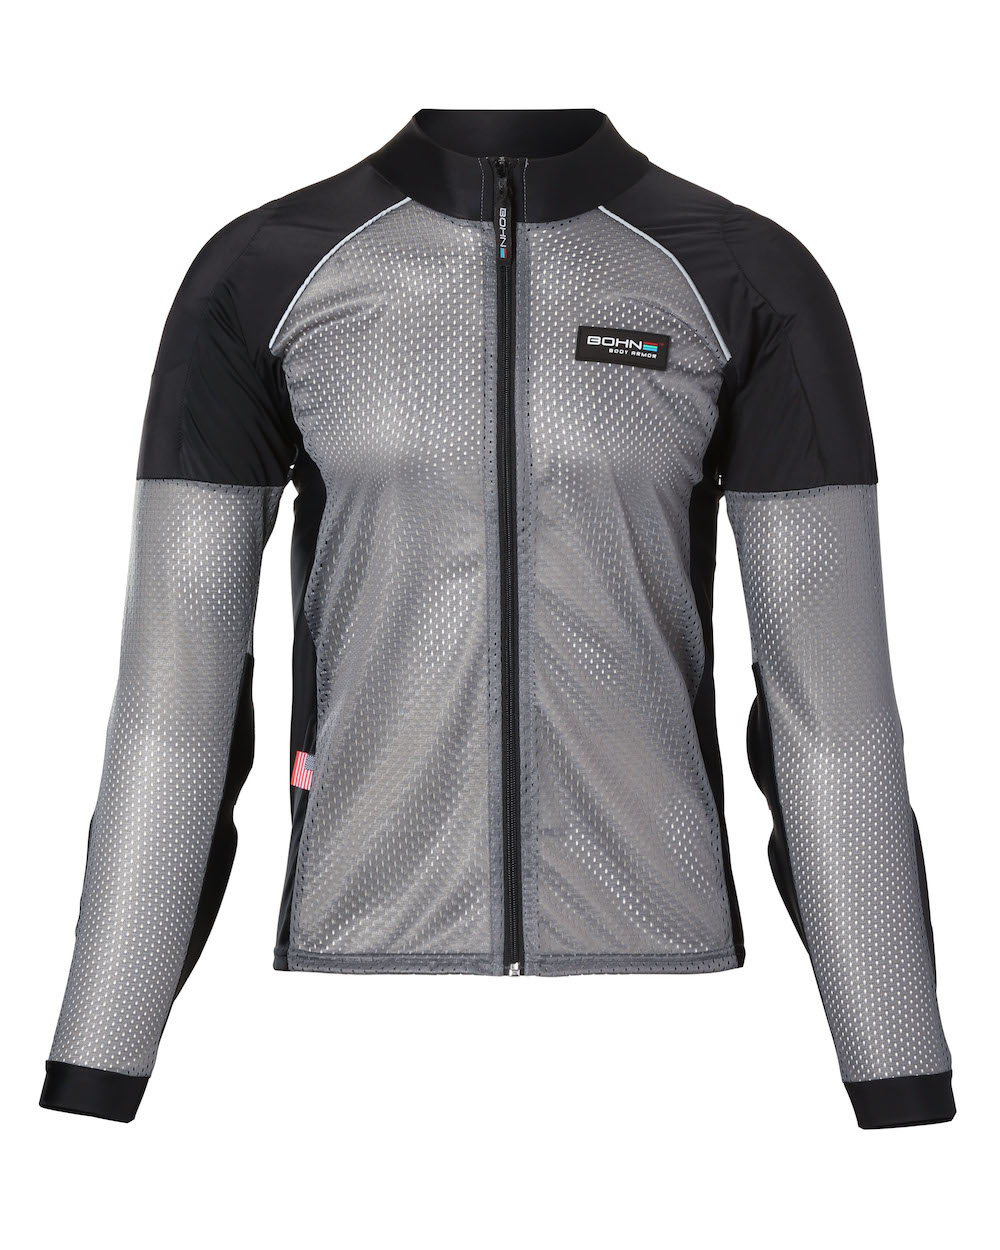 Armored Motorcycle Shirt | Breathable Mesh, Comfortable | XS-4XL